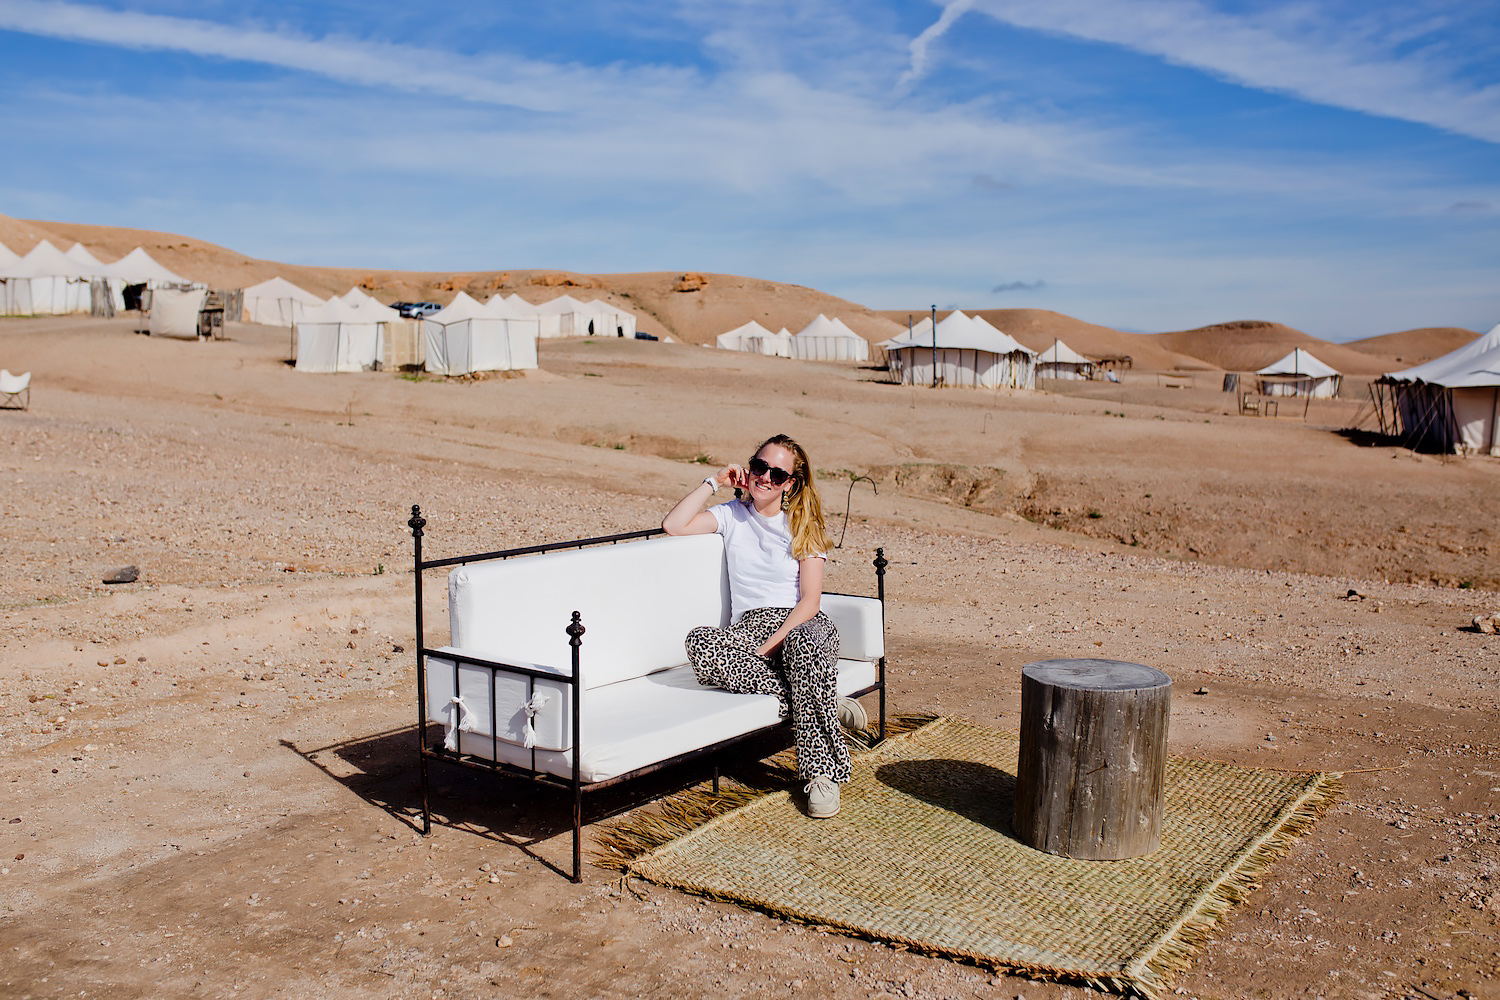 The Stone Desert experience: Glamping at SCARABEO CAMP